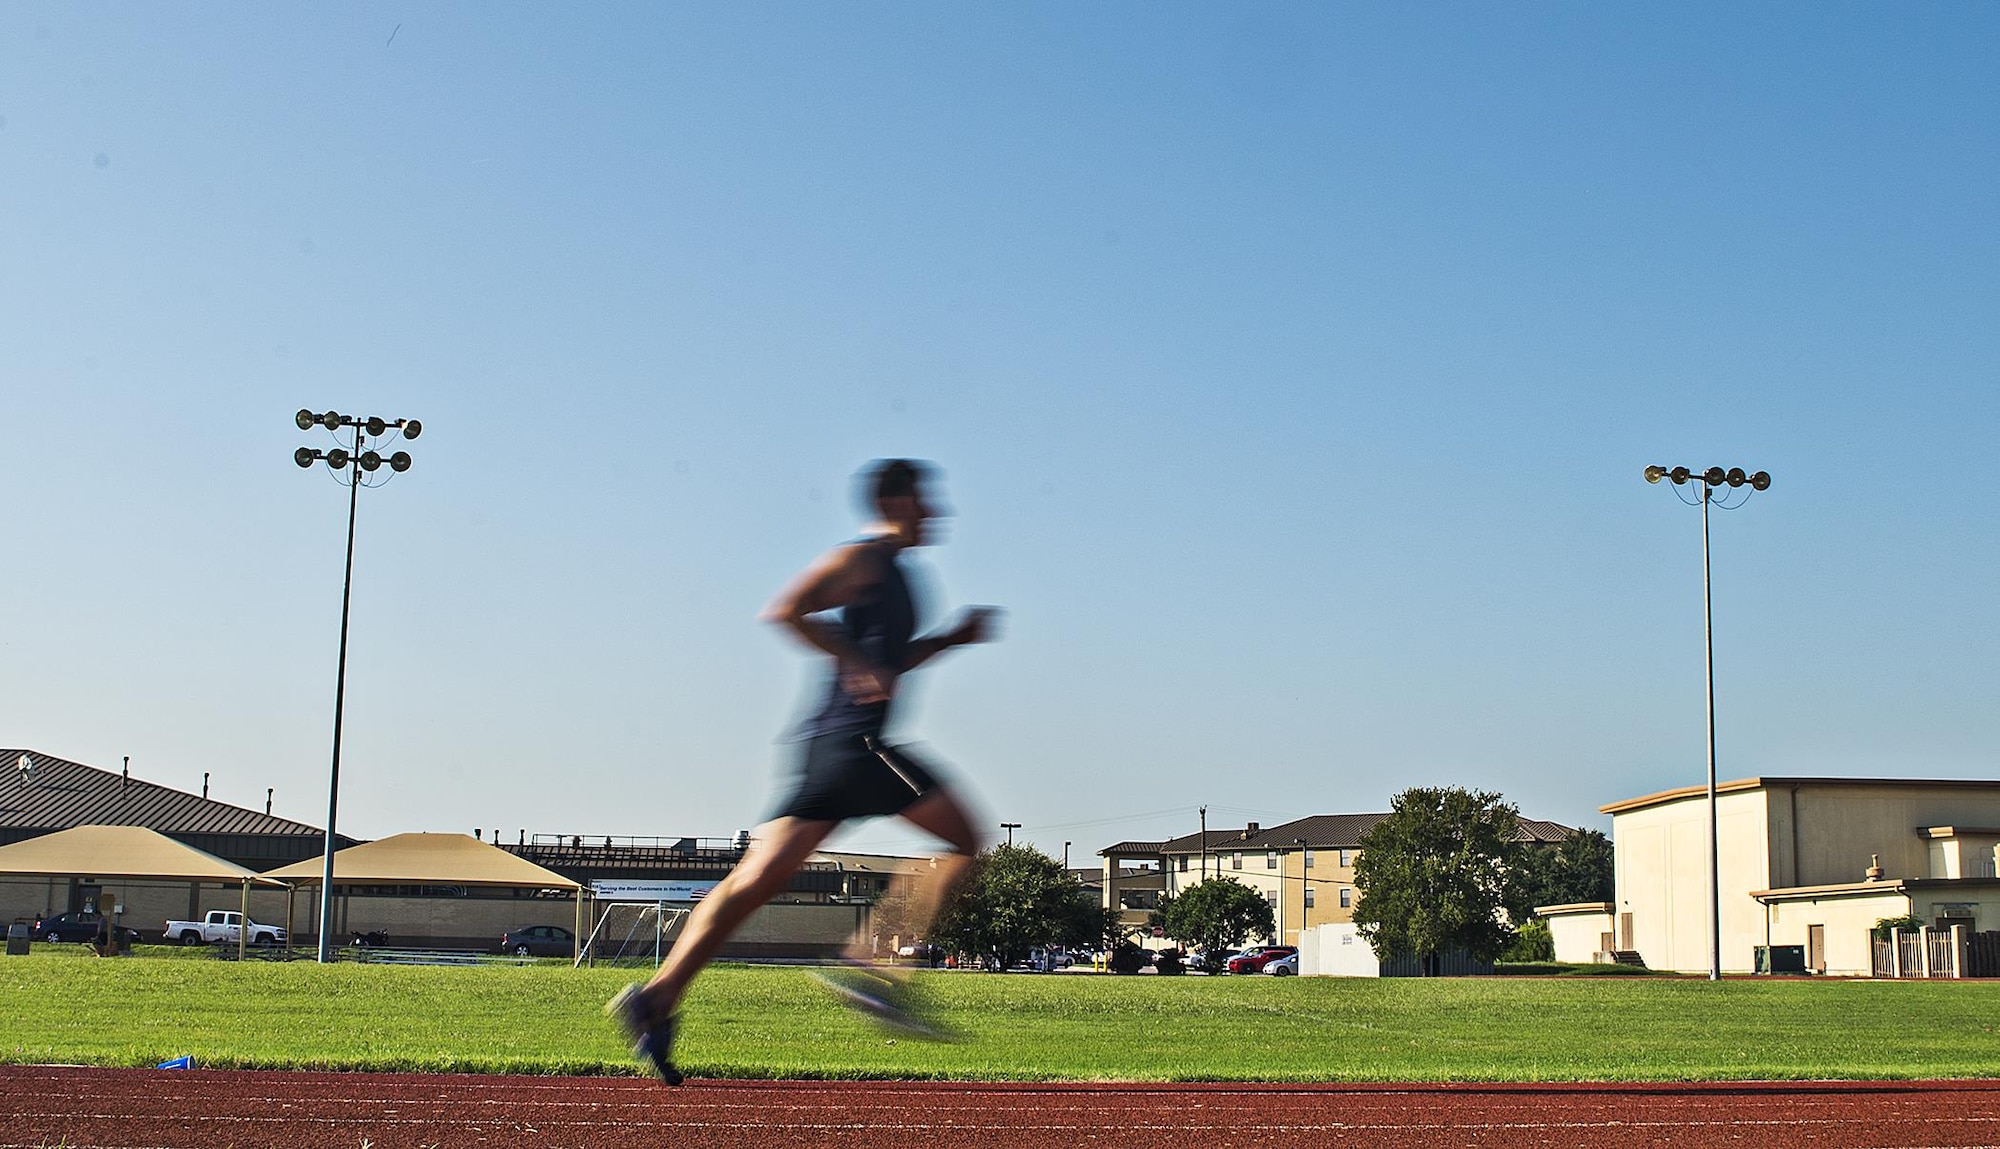 Master Sgt. Tito Carrillo, 433rd Aeromedical Evacuation Squadron flight medic, sprints down the straight away at the Warhawk track Sept. 1, 2016 at Joint Base San Antonio-Lackland, Texas. Carrillo was selected to run on the 2016 Air Force Reserve Command's Challenge Team. The team is comprised of 10 marathon runners who will compete with other Air Force major commands in the half and full marathon at the 20th annual Air Force Marathon Sept. 17, 2016 at Wright-Patterson Air Force Base, Ohio.  (U.S. Air Force photo by Benjamin Faske)